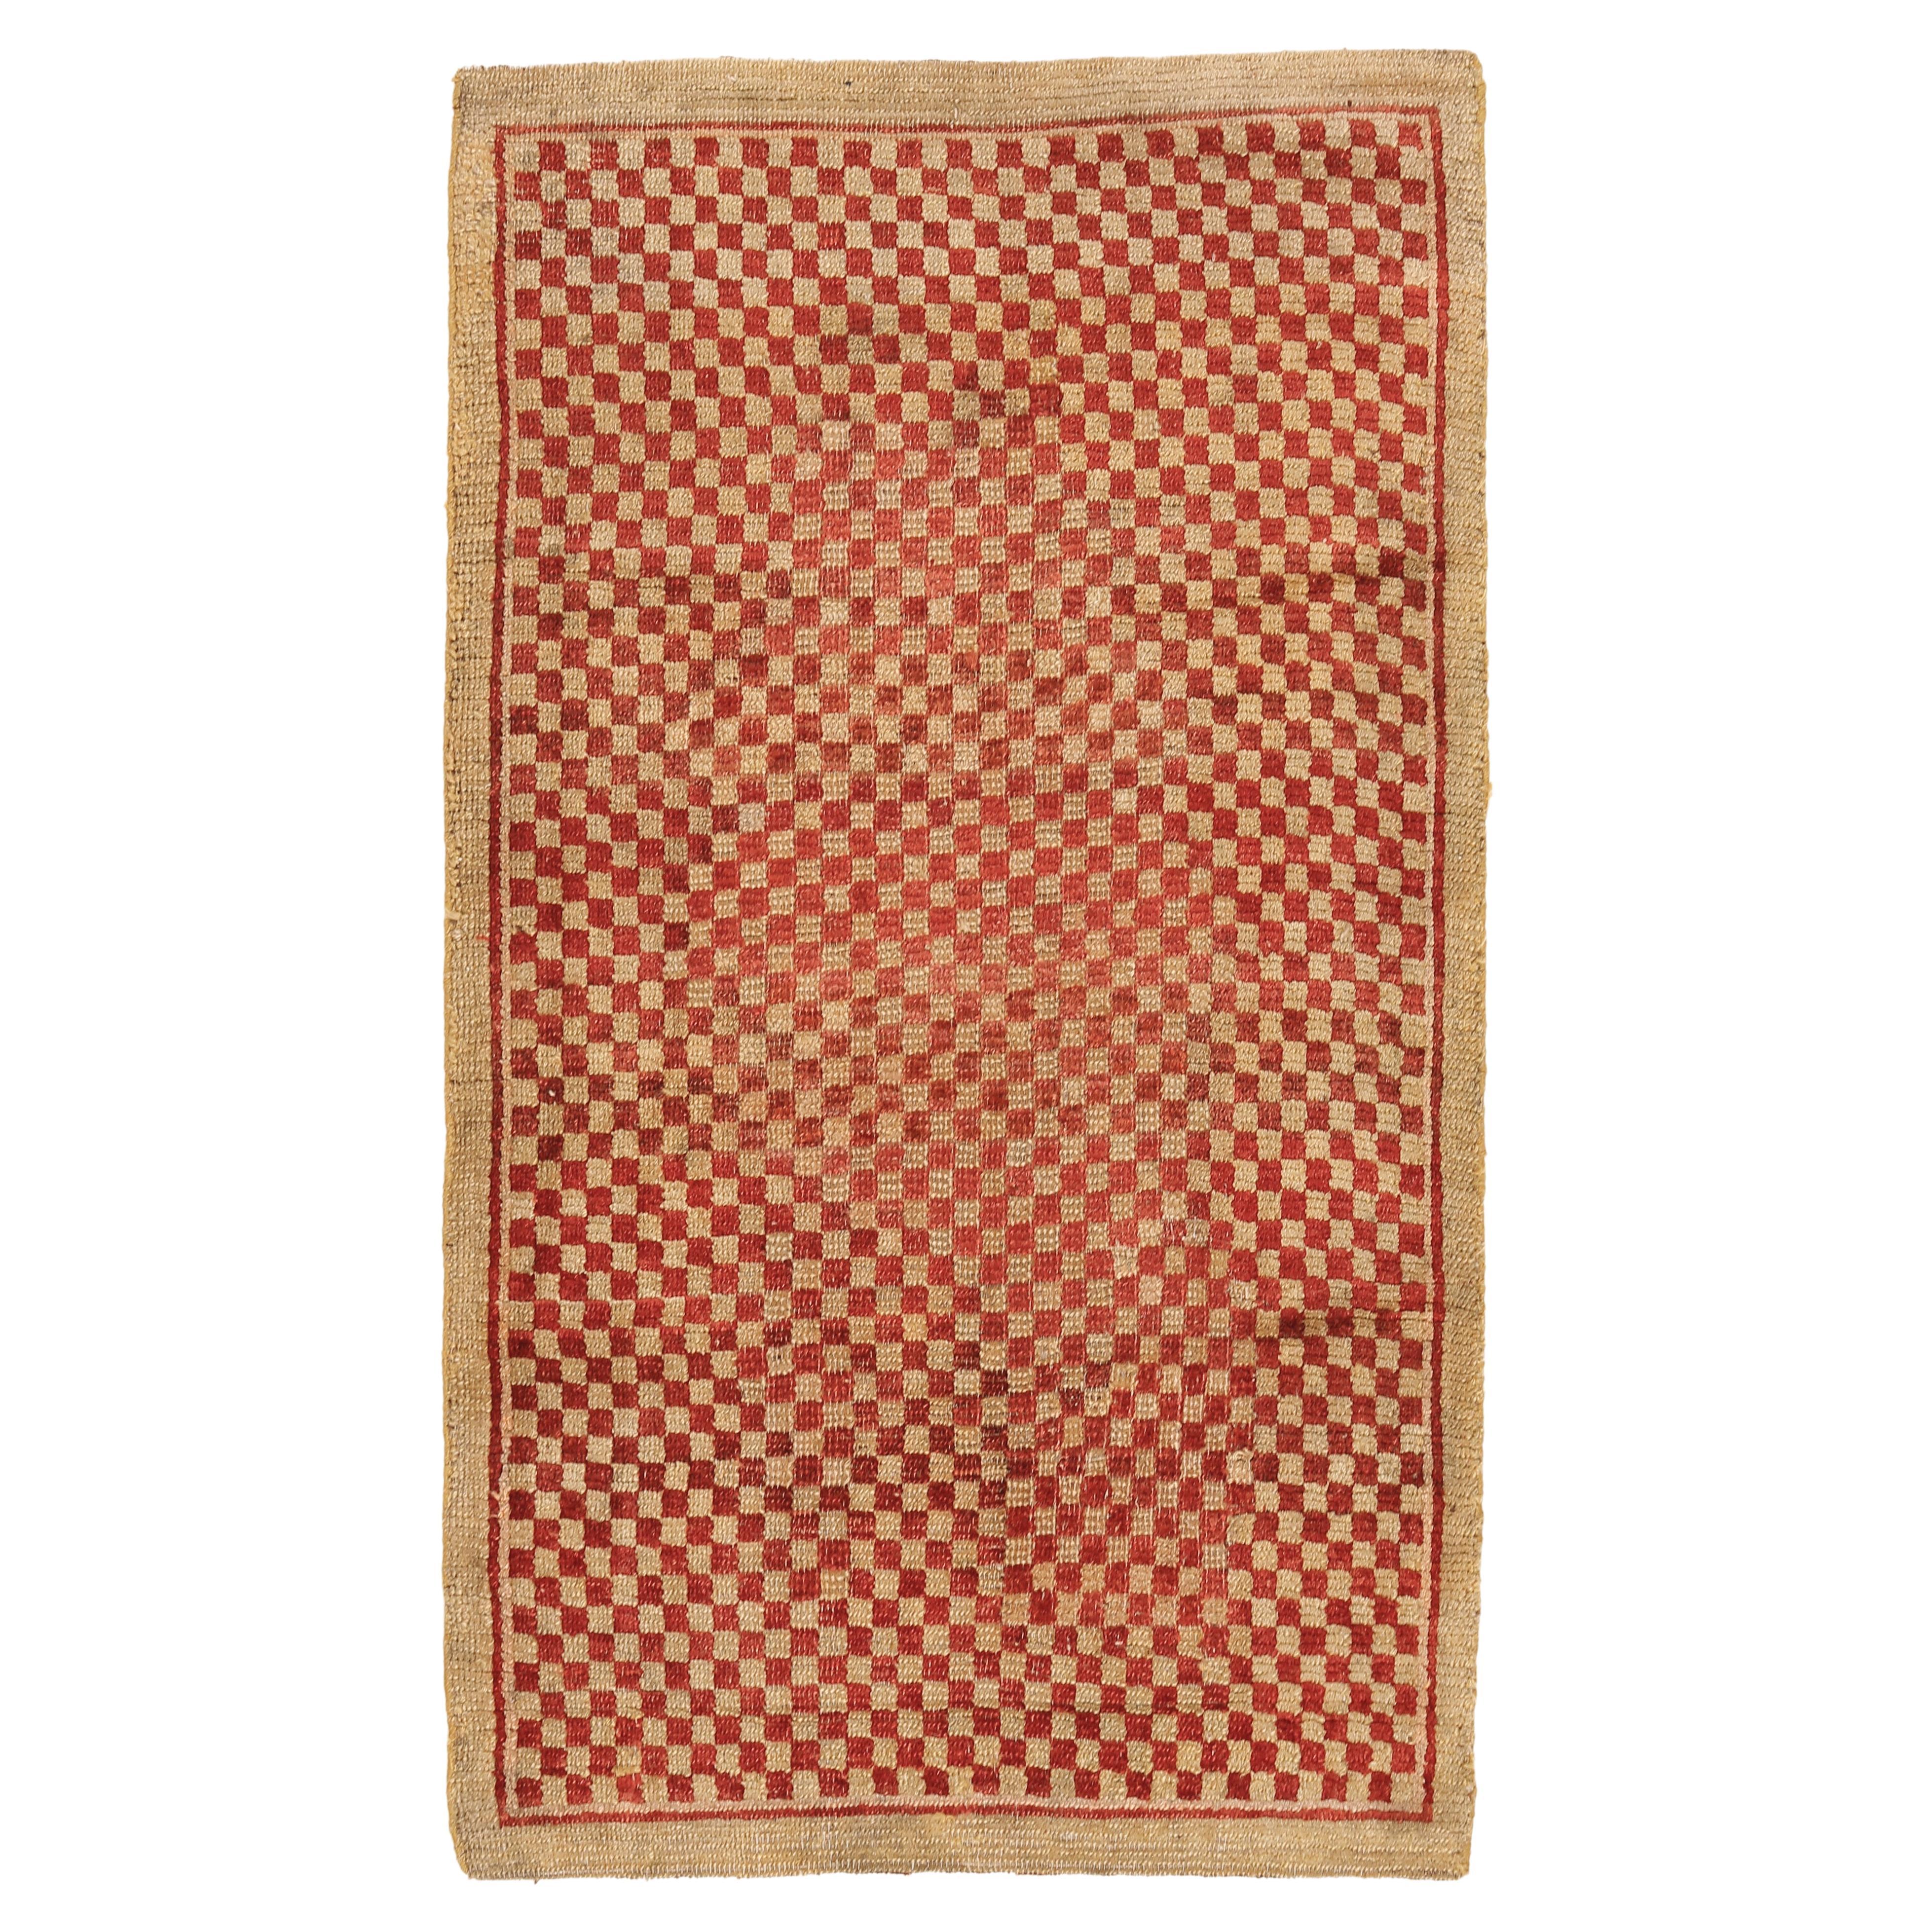 Antique Tibetan Red and White Checkerboard Design Meditation Rug For Sale